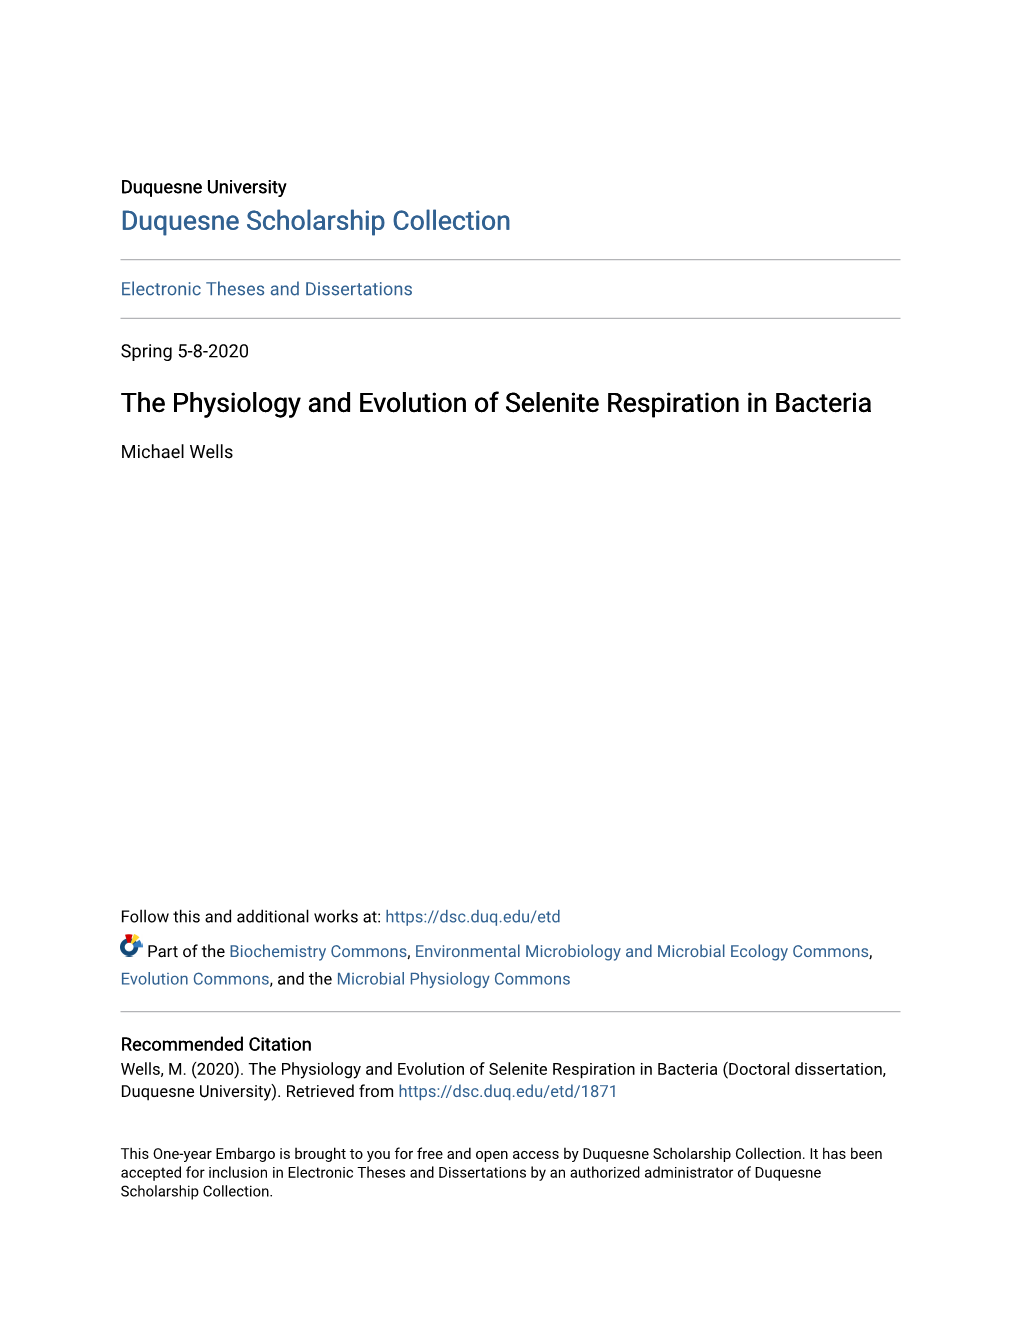 The Physiology and Evolution of Selenite Respiration in Bacteria